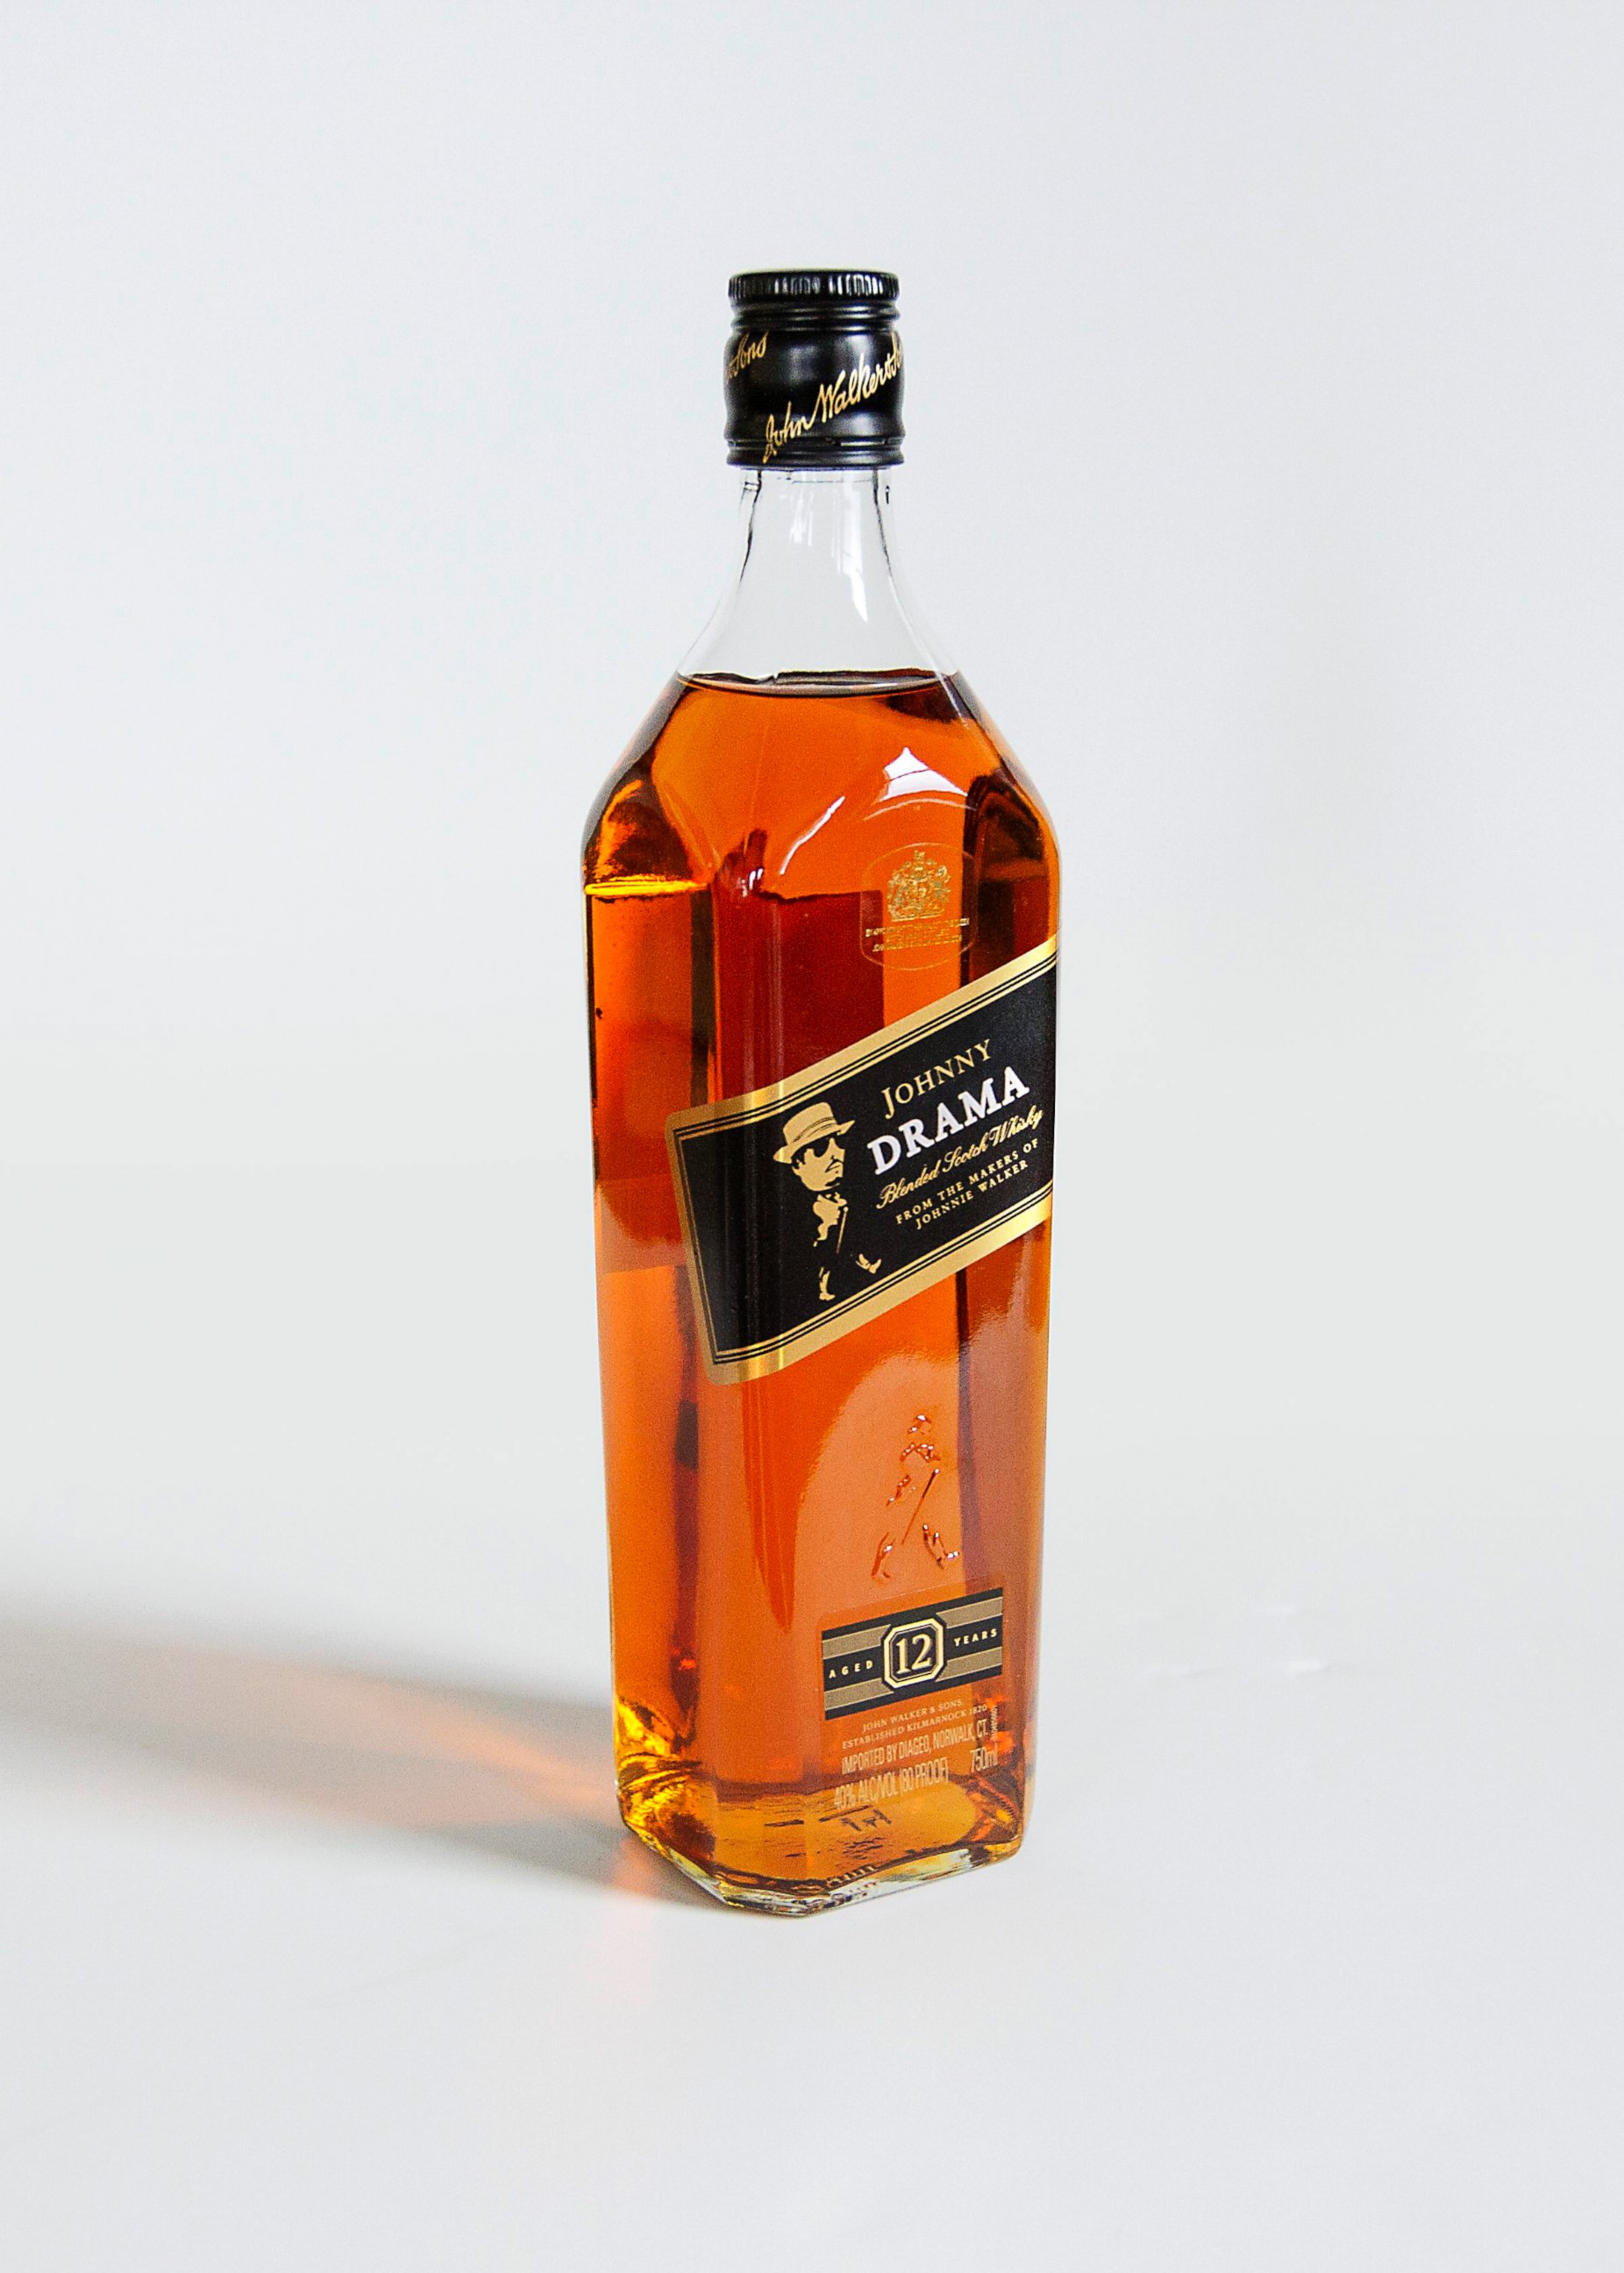 PHOTO: Johnnie Walker got in on April Fools' Day fun with the Johnny Drama Blend.